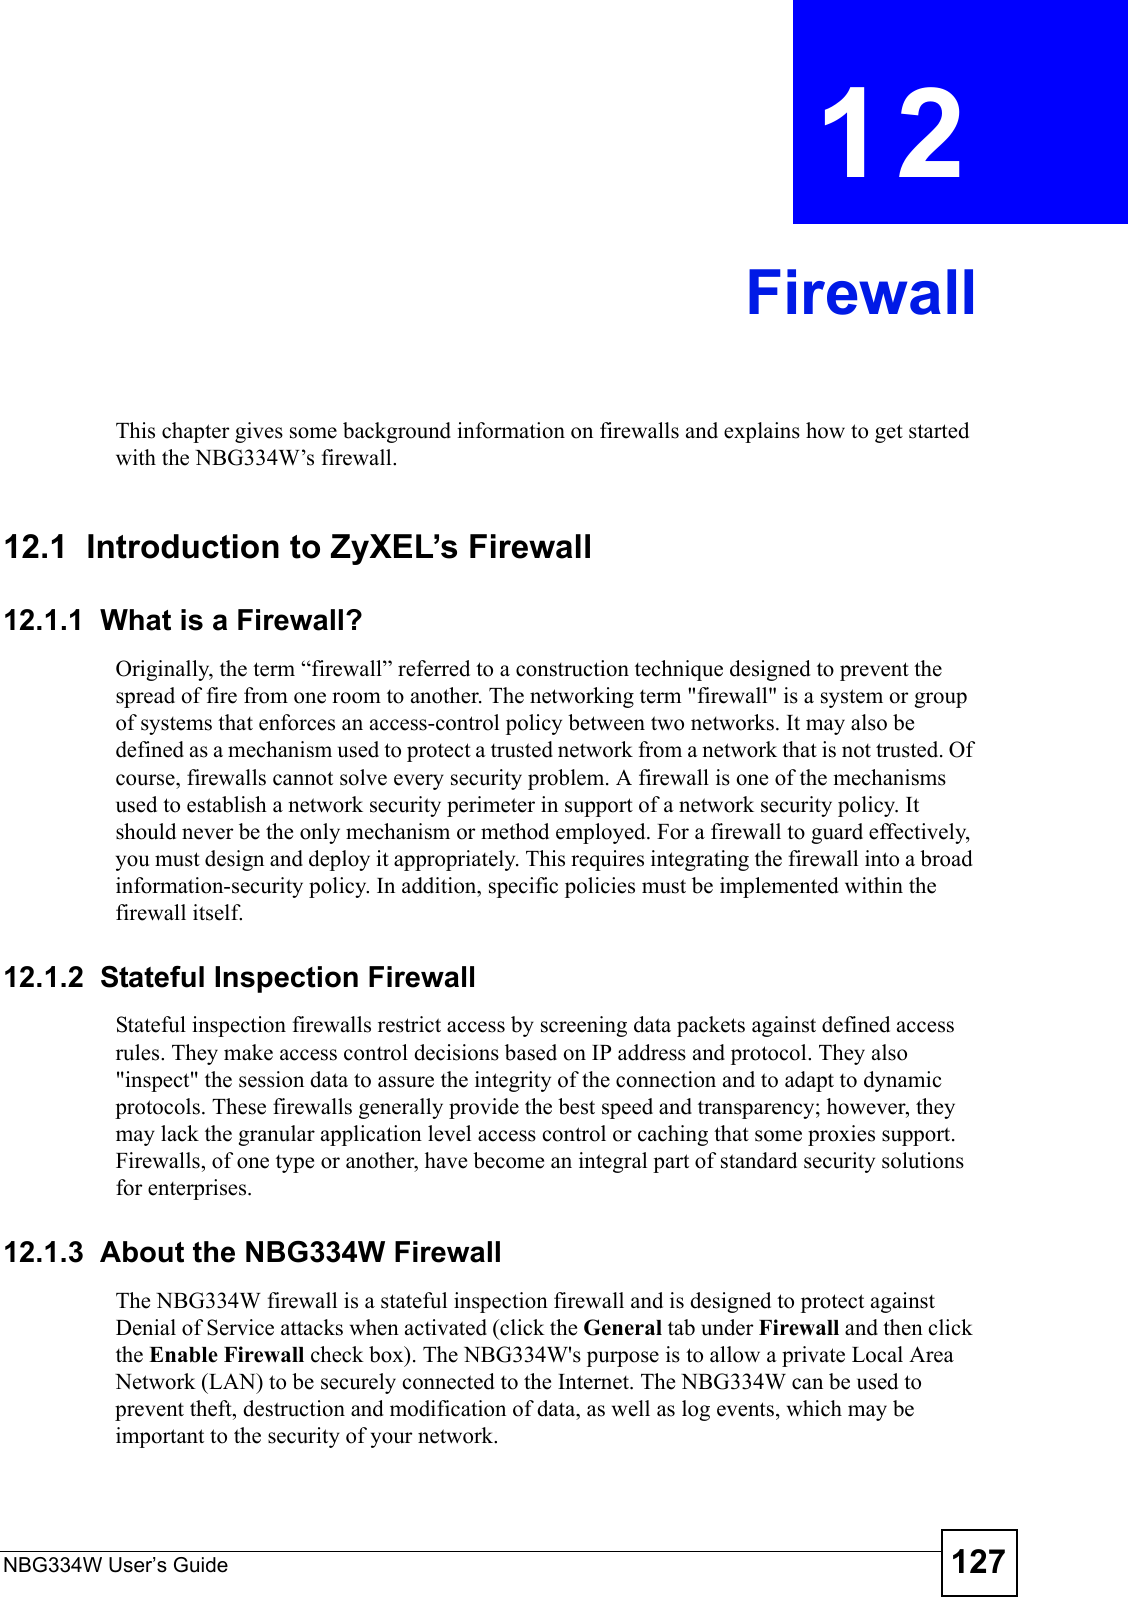 NBG334W User’s Guide 127CHAPTER  12  FirewallThis chapter gives some background information on firewalls and explains how to get started with the NBG334W’s firewall.12.1  Introduction to ZyXEL’s Firewall   12.1.1  What is a Firewall?Originally, the term “firewall” referred to a construction technique designed to prevent the spread of fire from one room to another. The networking term &quot;firewall&quot; is a system or group of systems that enforces an access-control policy between two networks. It may also be defined as a mechanism used to protect a trusted network from a network that is not trusted. Of course, firewalls cannot solve every security problem. A firewall is one of the mechanisms used to establish a network security perimeter in support of a network security policy. It should never be the only mechanism or method employed. For a firewall to guard effectively, you must design and deploy it appropriately. This requires integrating the firewall into a broad information-security policy. In addition, specific policies must be implemented within the firewall itself. 12.1.2  Stateful Inspection Firewall Stateful inspection firewalls restrict access by screening data packets against defined access rules. They make access control decisions based on IP address and protocol. They also &quot;inspect&quot; the session data to assure the integrity of the connection and to adapt to dynamic protocols. These firewalls generally provide the best speed and transparency; however, they may lack the granular application level access control or caching that some proxies support. Firewalls, of one type or another, have become an integral part of standard security solutions for enterprises.12.1.3  About the NBG334W FirewallThe NBG334W firewall is a stateful inspection firewall and is designed to protect against Denial of Service attacks when activated (click the General tab under Firewall and then click the Enable Firewall check box). The NBG334W&apos;s purpose is to allow a private Local Area Network (LAN) to be securely connected to the Internet. The NBG334W can be used to prevent theft, destruction and modification of data, as well as log events, which may be important to the security of your network. 